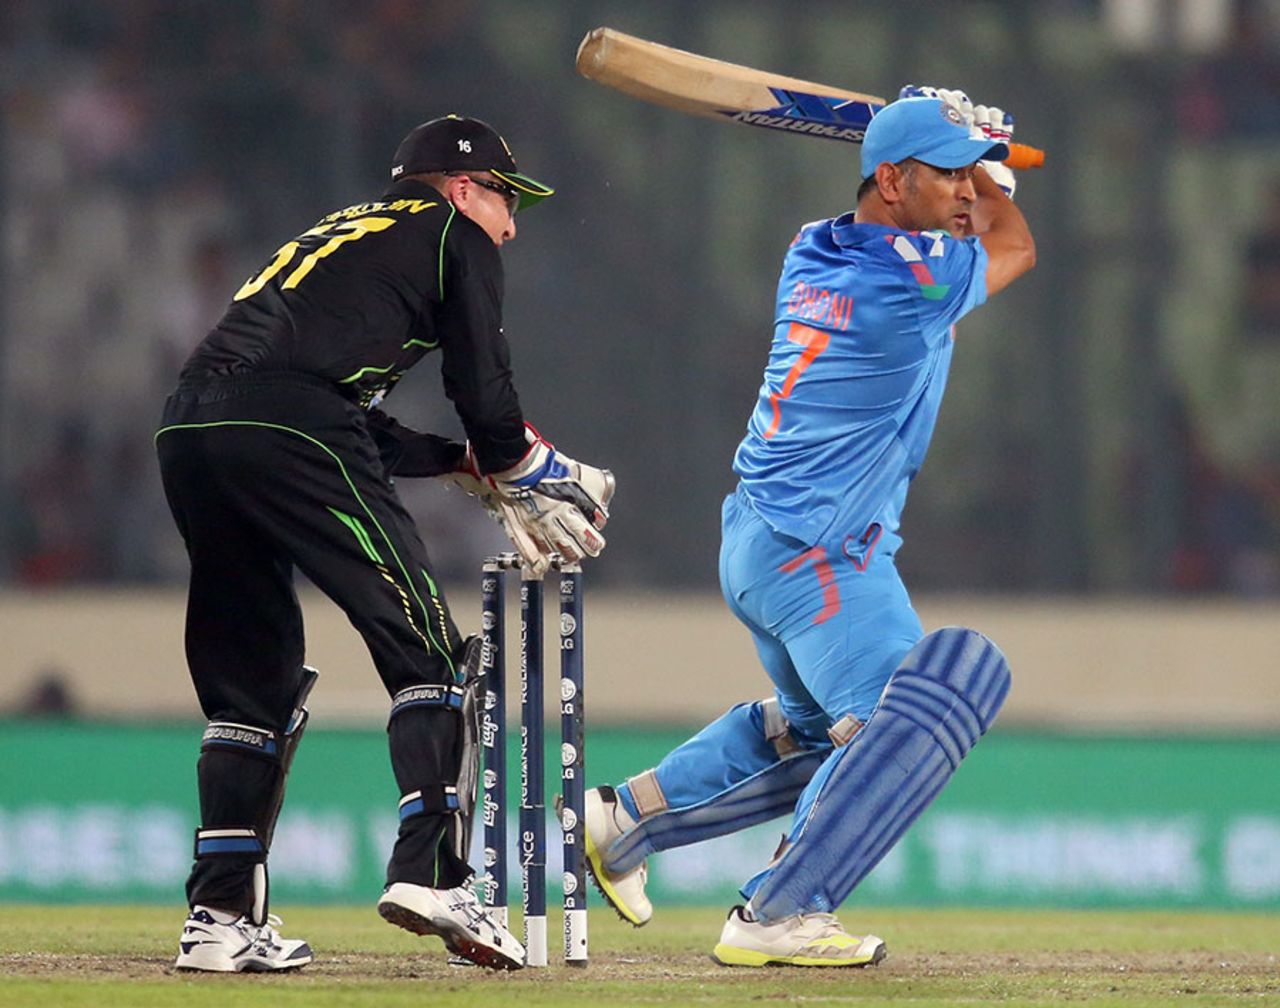 MS Dhoni rocks back and plays a cut, Australia v India, World T20, Group 2, Mirpur, March 30, 2014